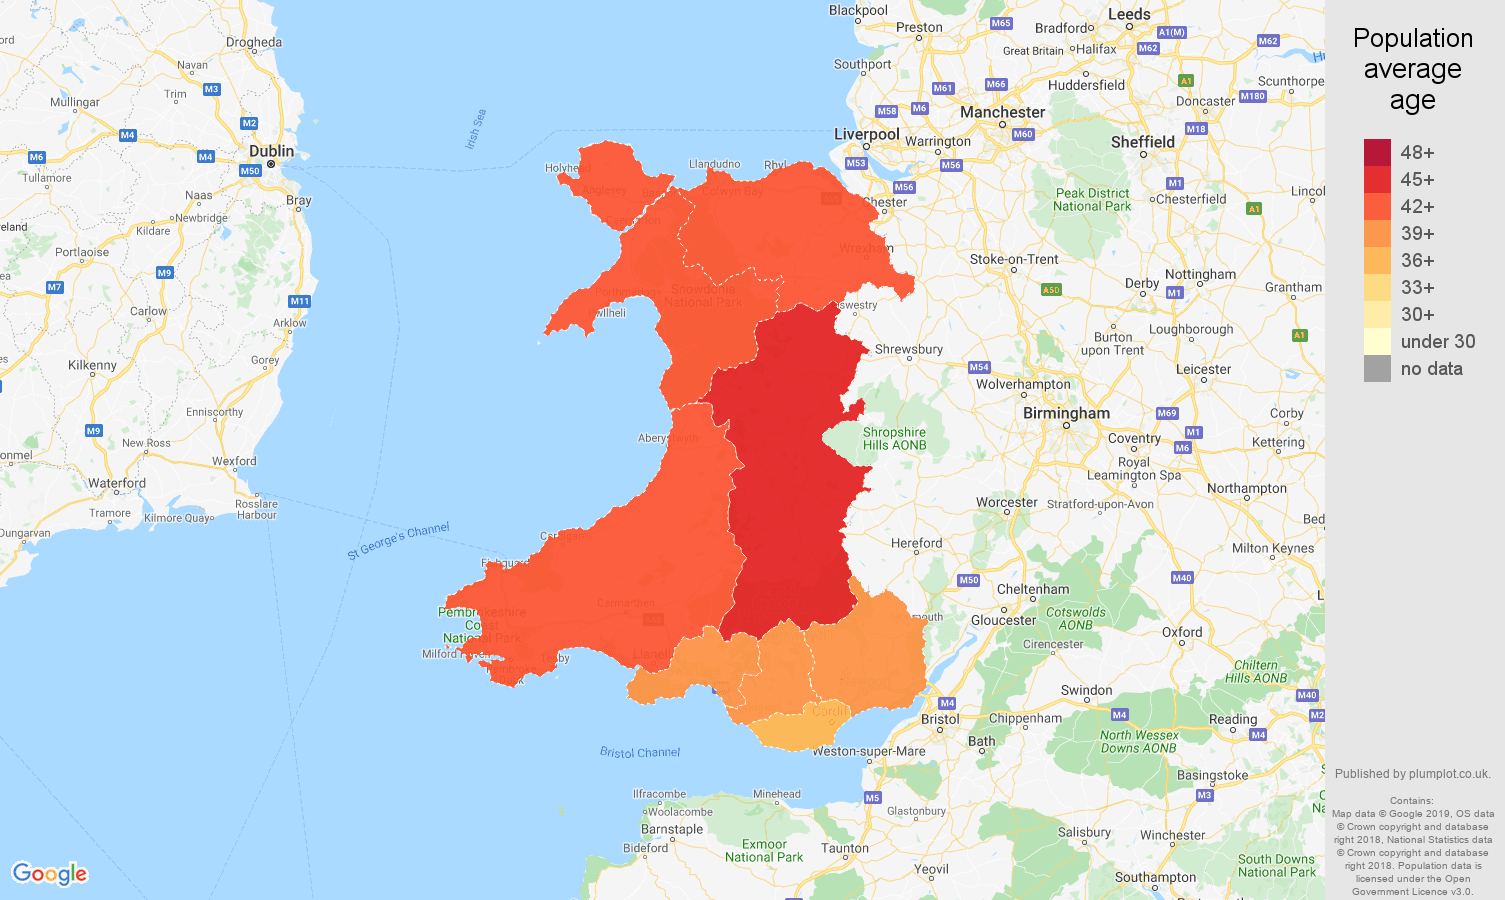 Wales population average age map